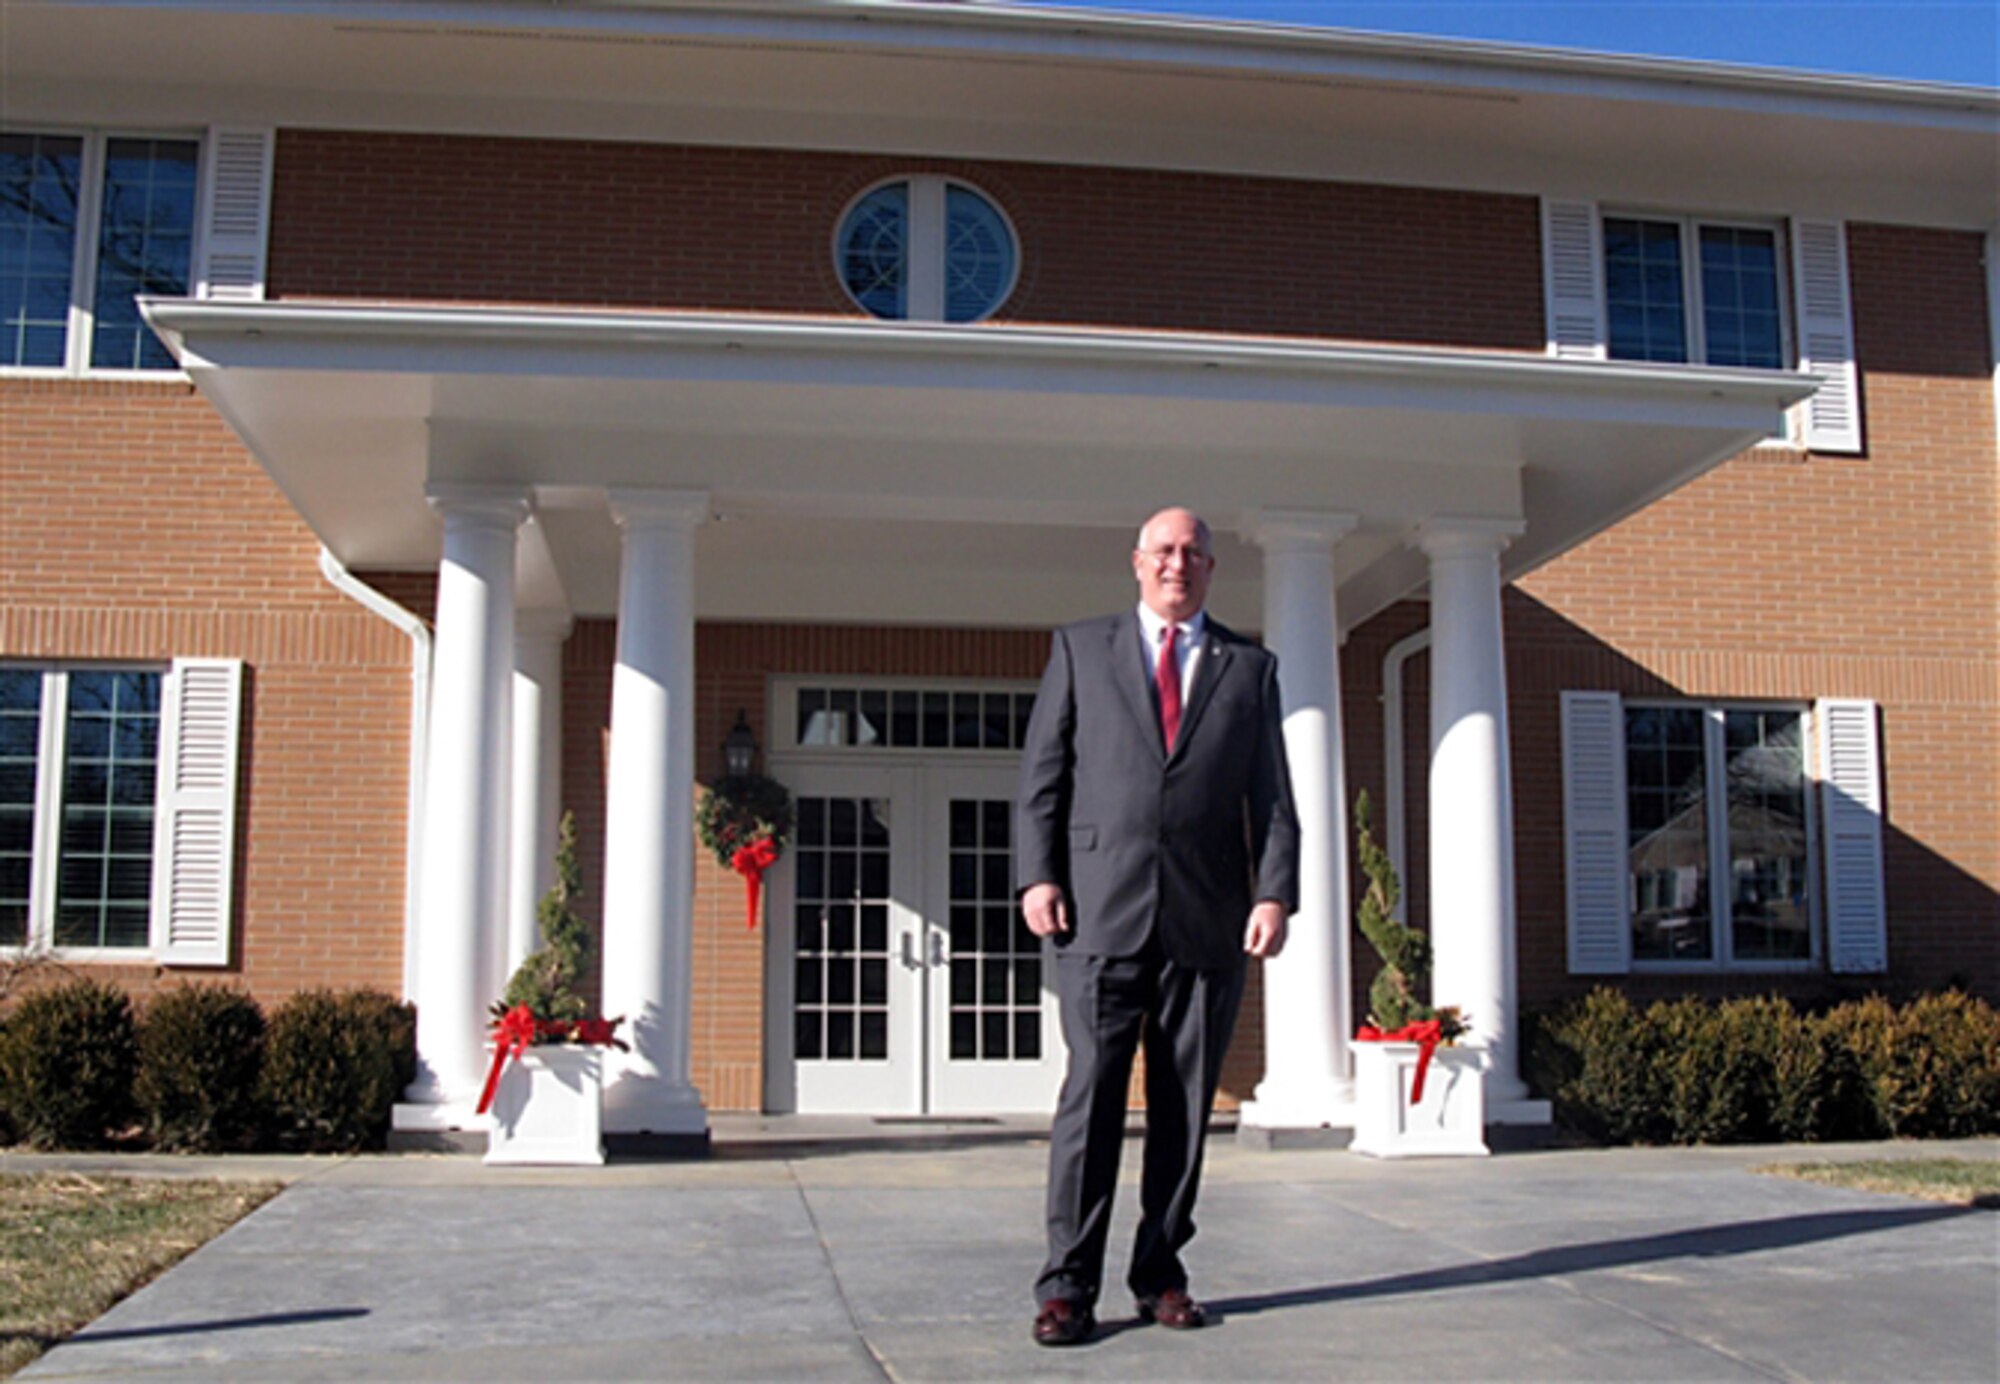 Dave Coker stands in front of one of three new Fisher Houses at the National Naval Medical Center in Bethesda, Md. Mr. Coker is the president of the Fisher House Foundation. (Department of Defense photo/Donna Miles)